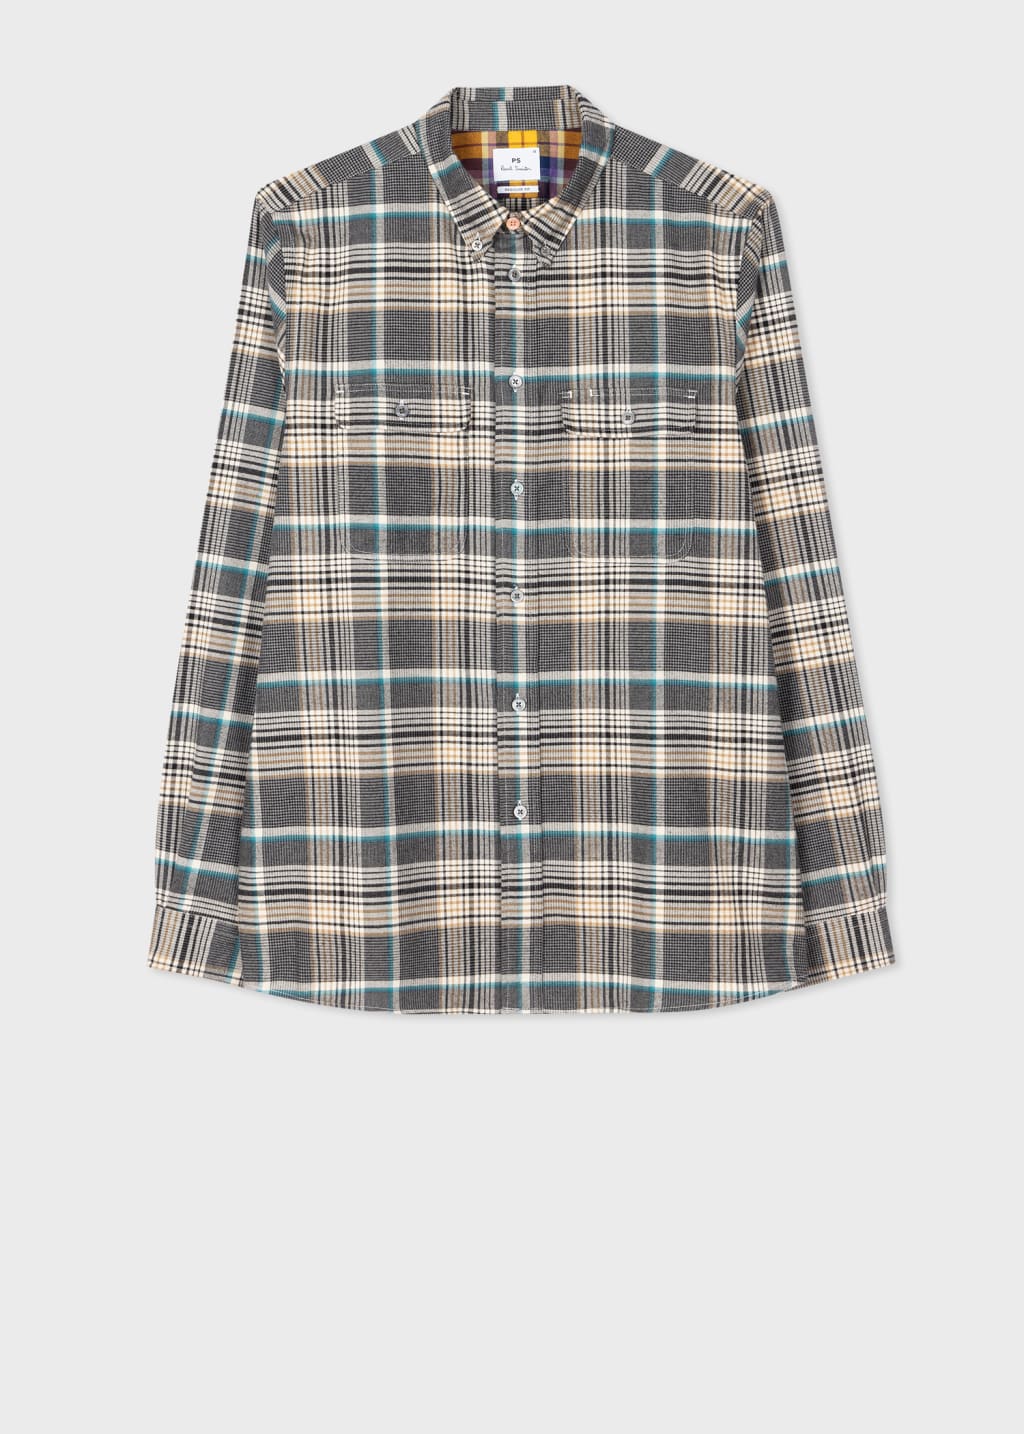 Front View - Grey Check Double Pocket Shirt Paul Smith